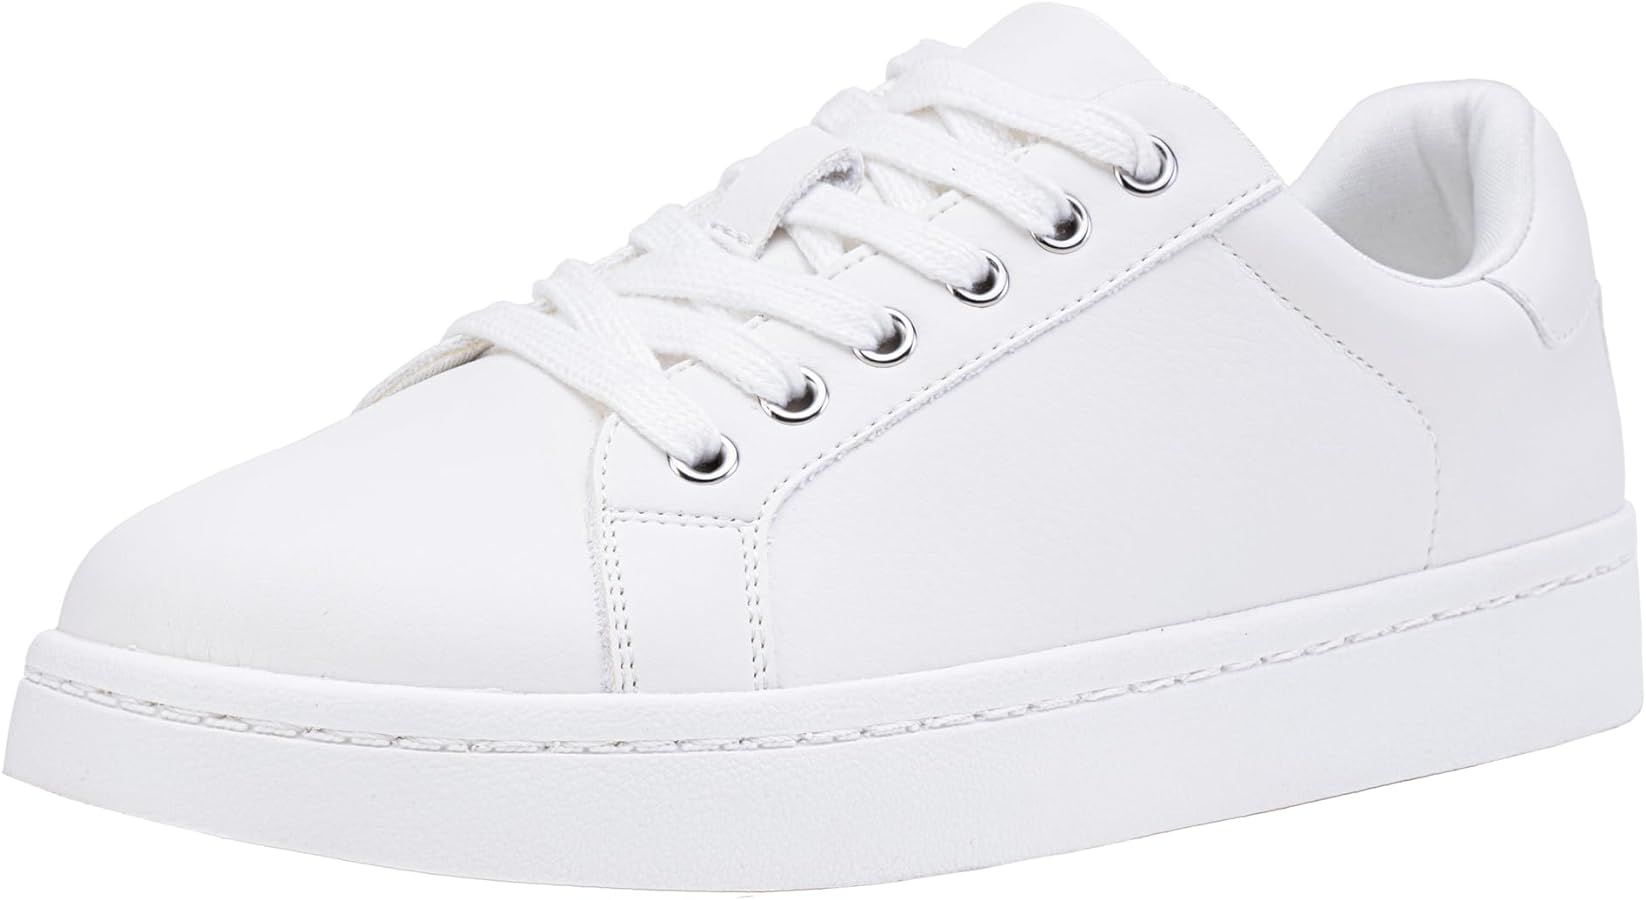 Vepose Women's 8003 Fashion Lace Up Comfortable Casual Tennis Sneakers | Amazon (US)